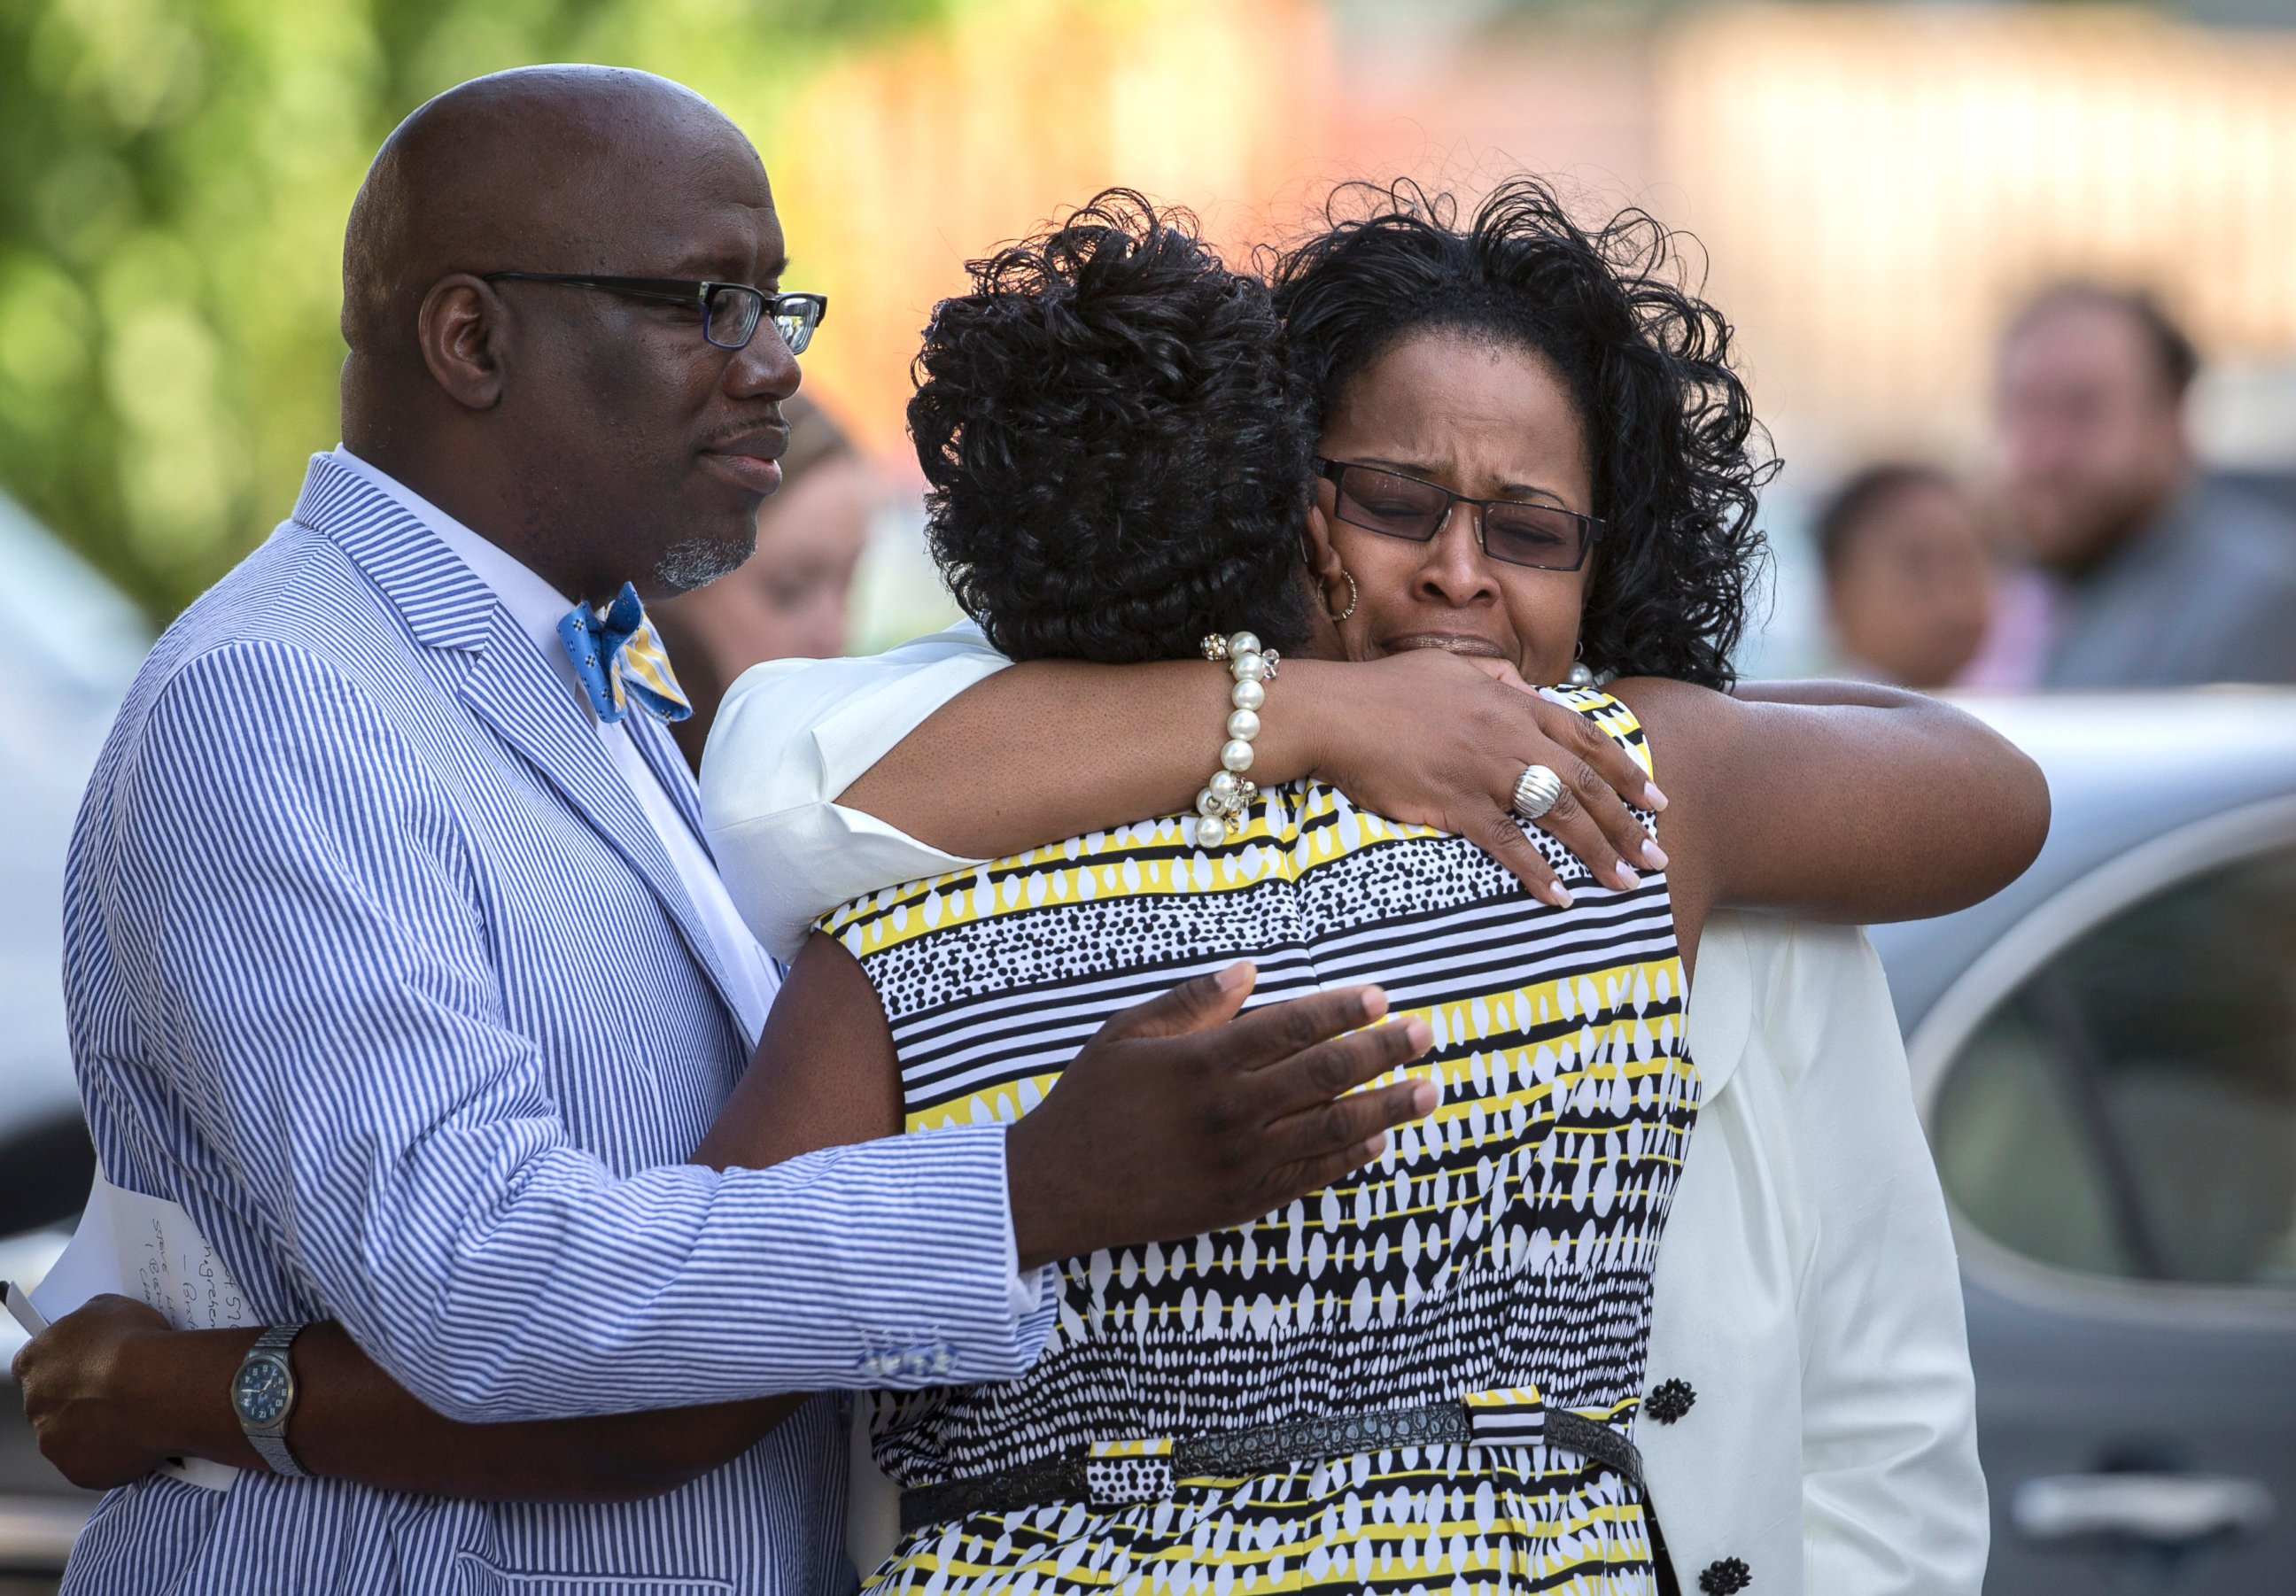 PHOTO: A group of church members greet each other before entering the Emanuel AME Church for a worship service, June 21, 2015, in Charleston, S.C.